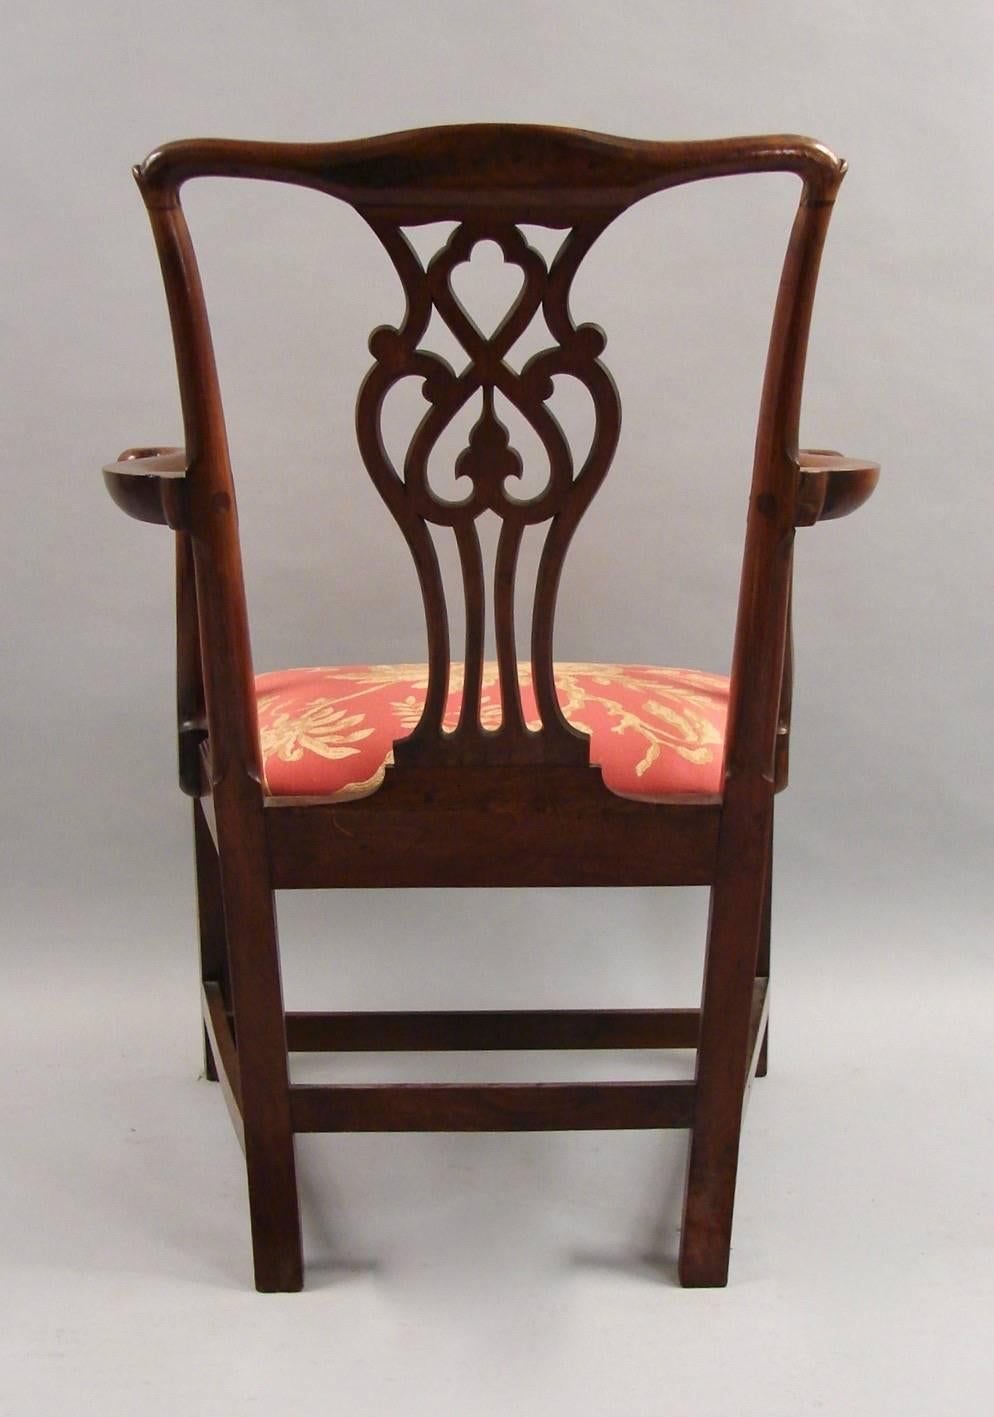 A good quality English mahogany Chippendale period armchair with a simple crest rail above an intricate splat, centered by elegantly fashioned arms, the rose brocade upholstery with a floral motif, all supported on straight legs joined by